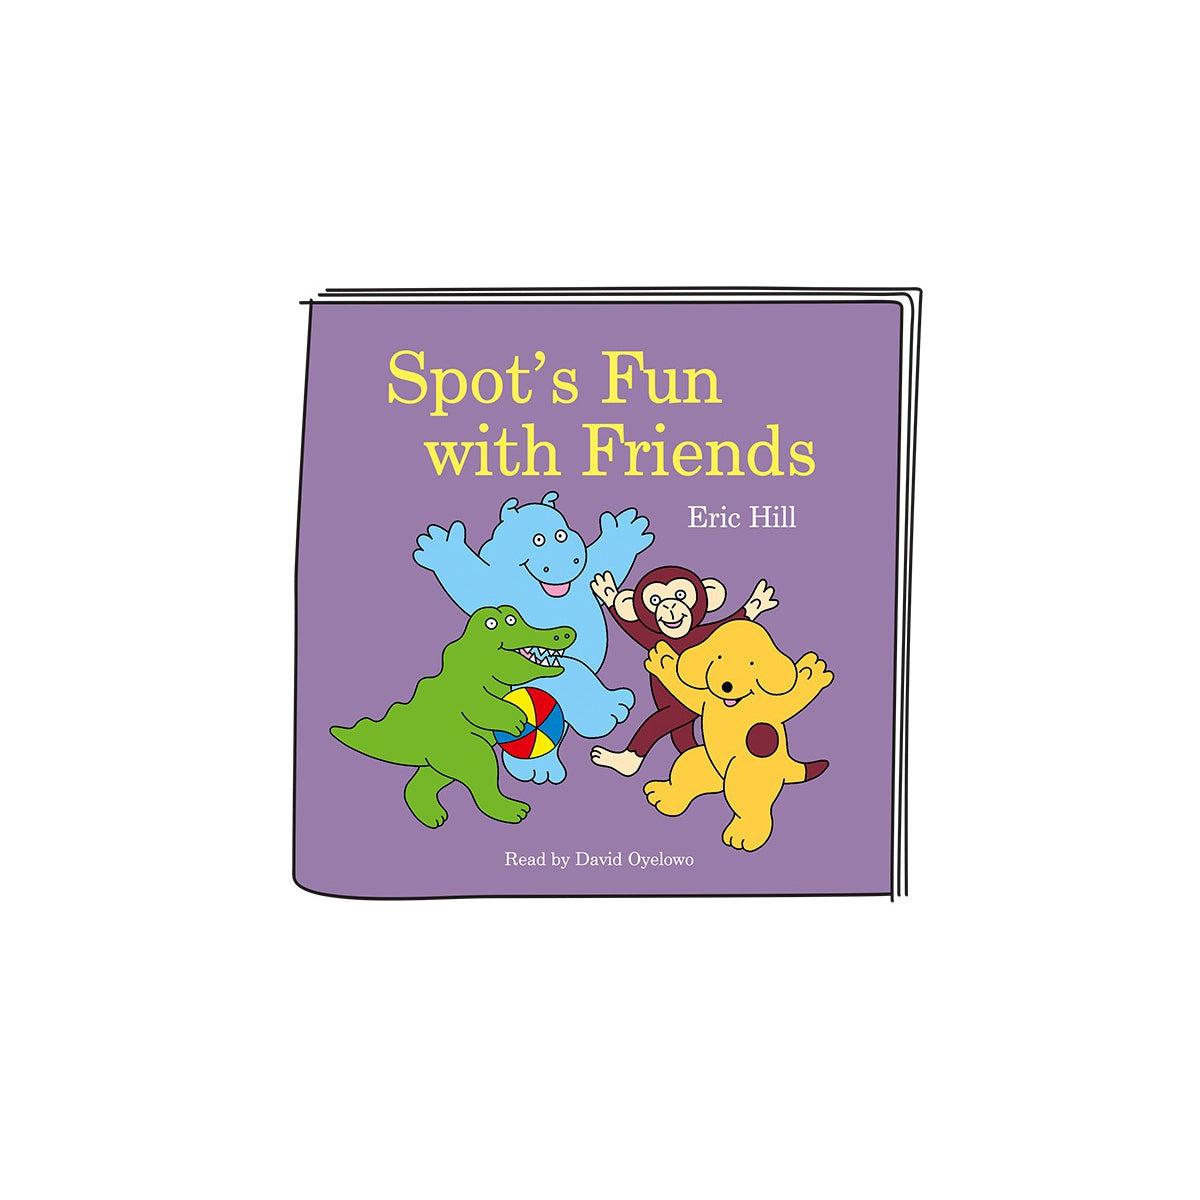 Tonies Fun with Spot - Spot's Fun with Friends - Audio Character for use with Toniebox Player